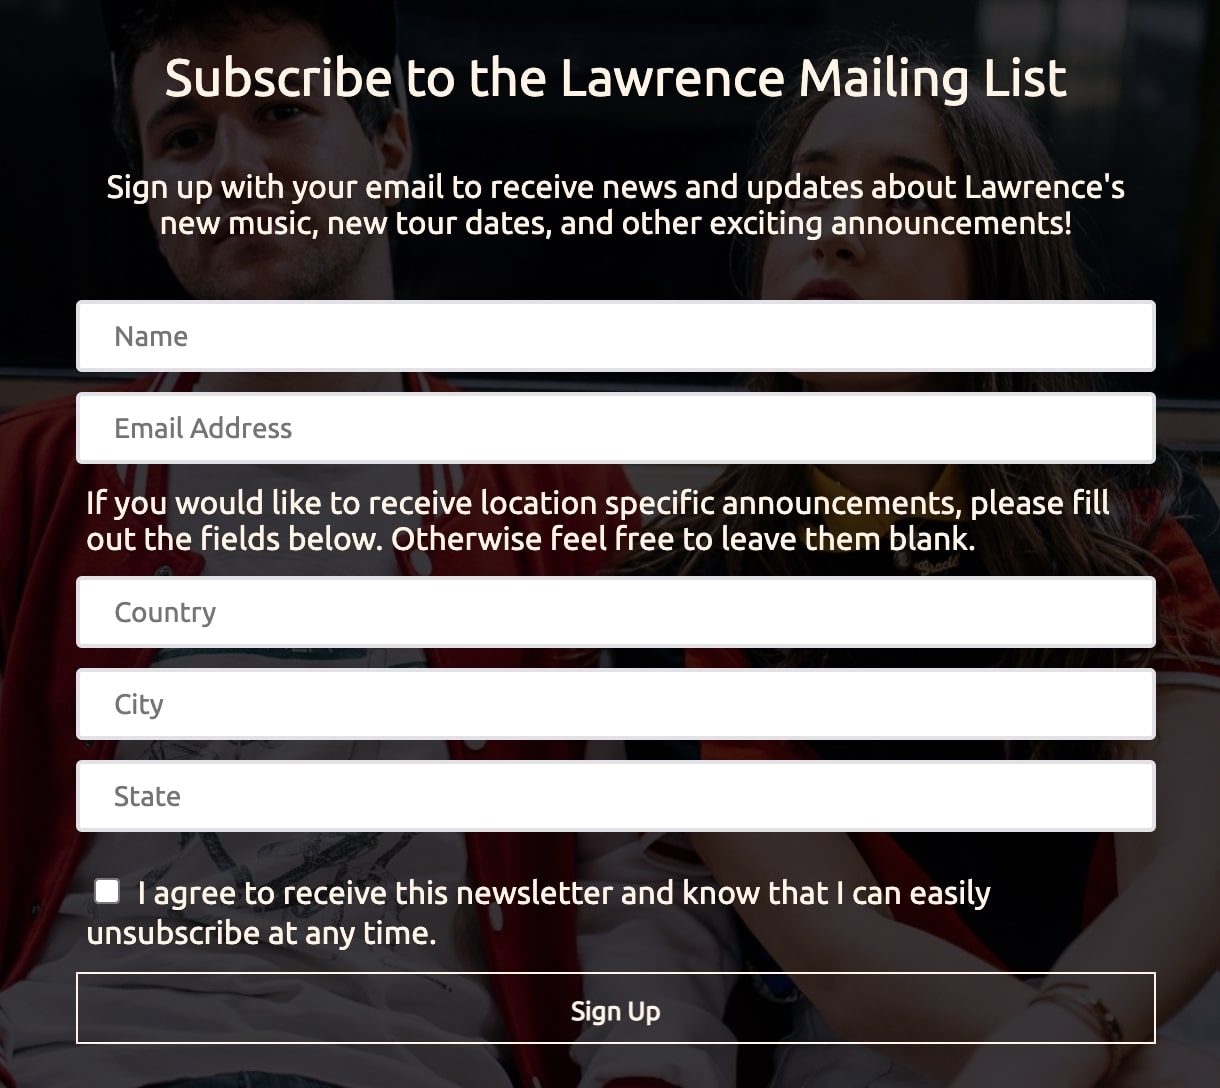 An example of a signup form from Lawrence